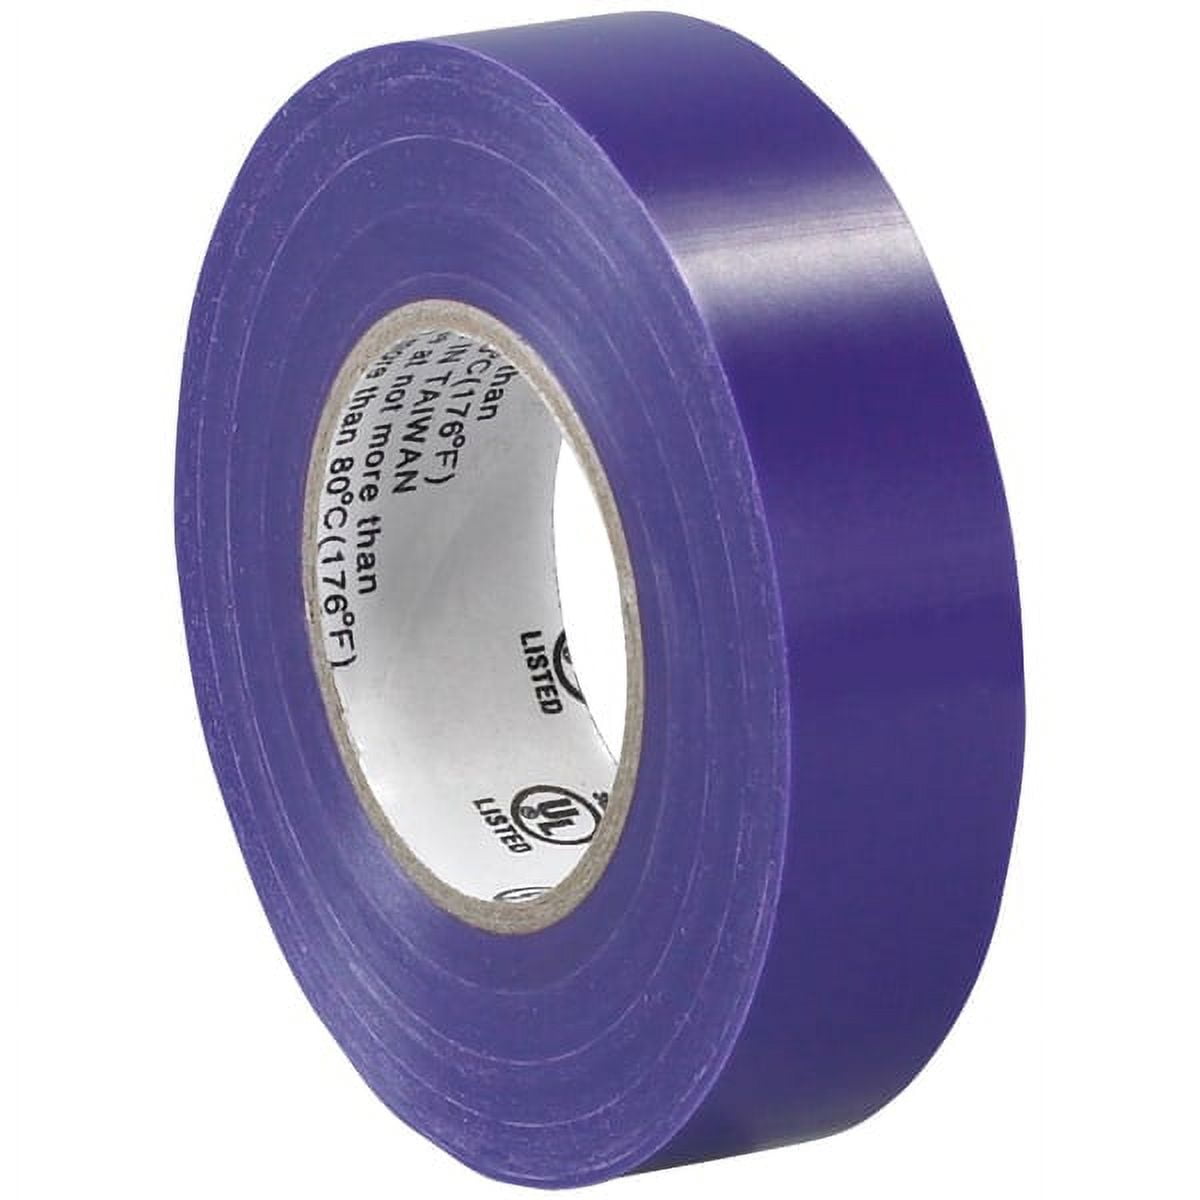 T964618m 0.75 In. X 20 Yards Purple Electrical Tape - Case Of 200